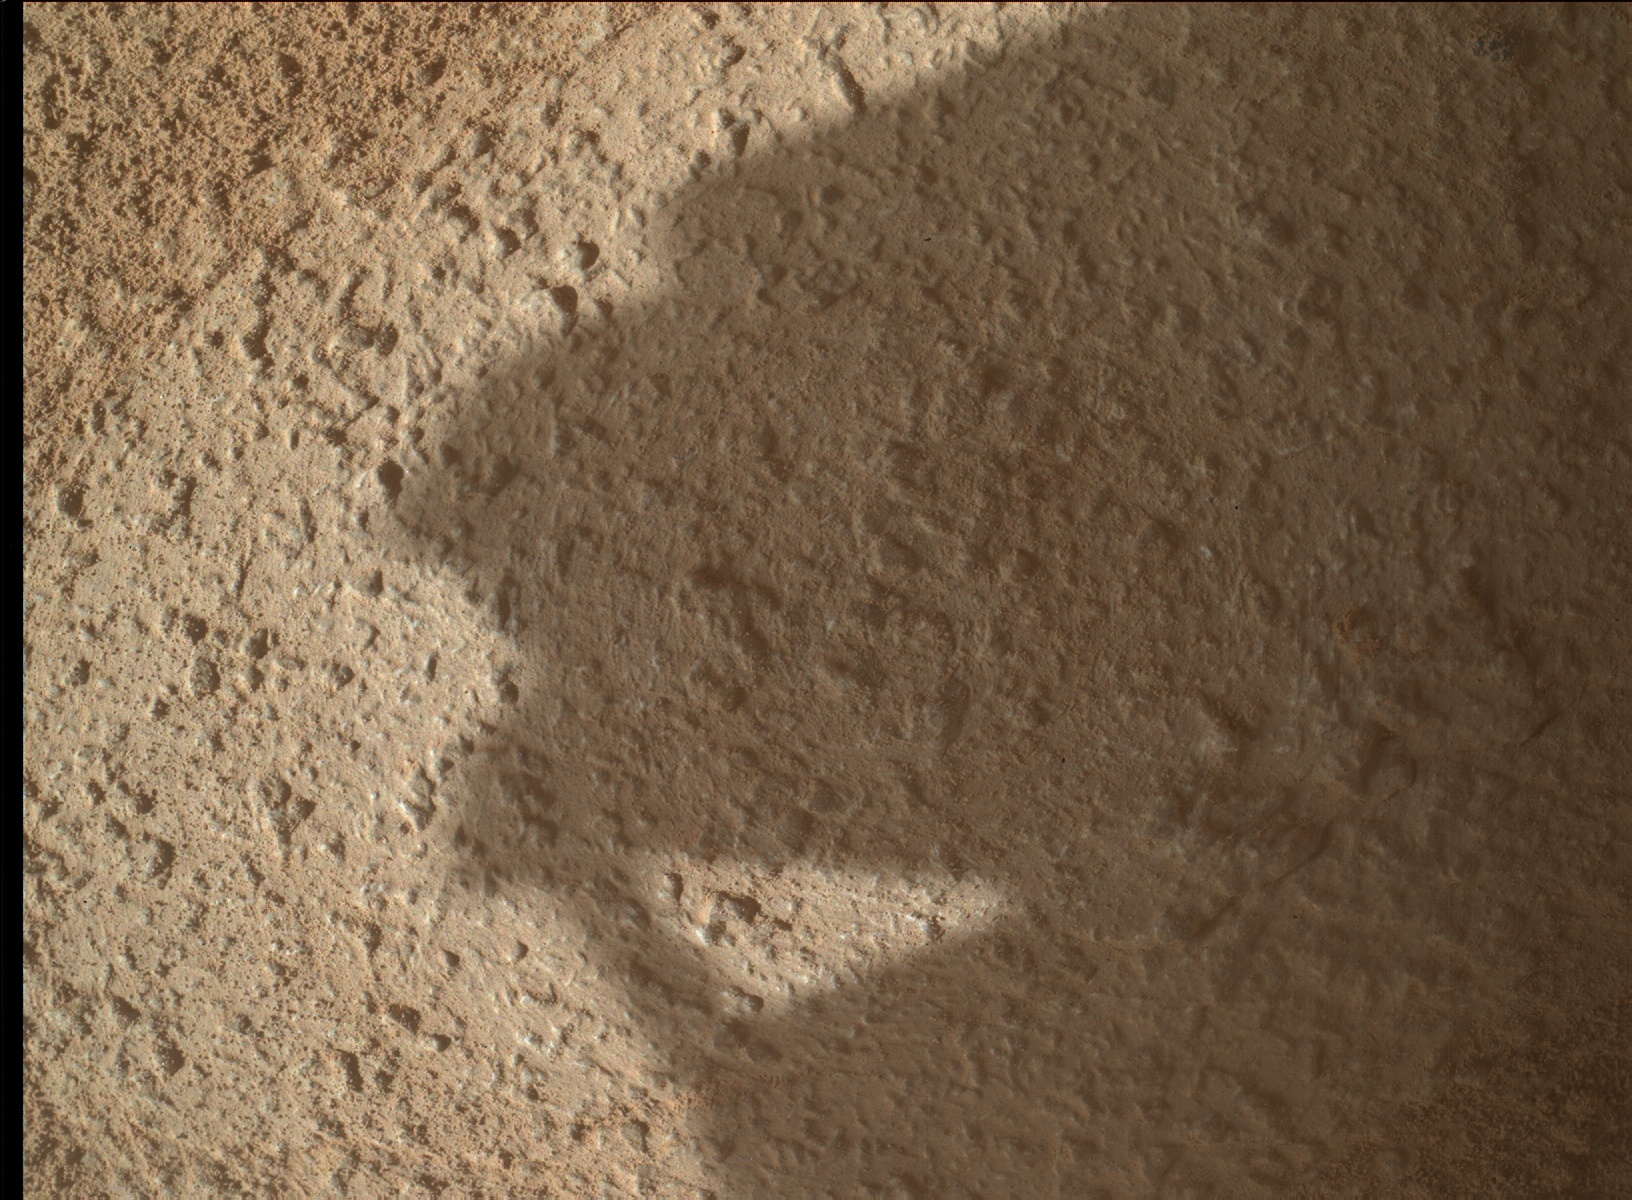 Nasa's Mars rover Curiosity acquired this image using its Mars Hand Lens Imager (MAHLI) on Sol 3810